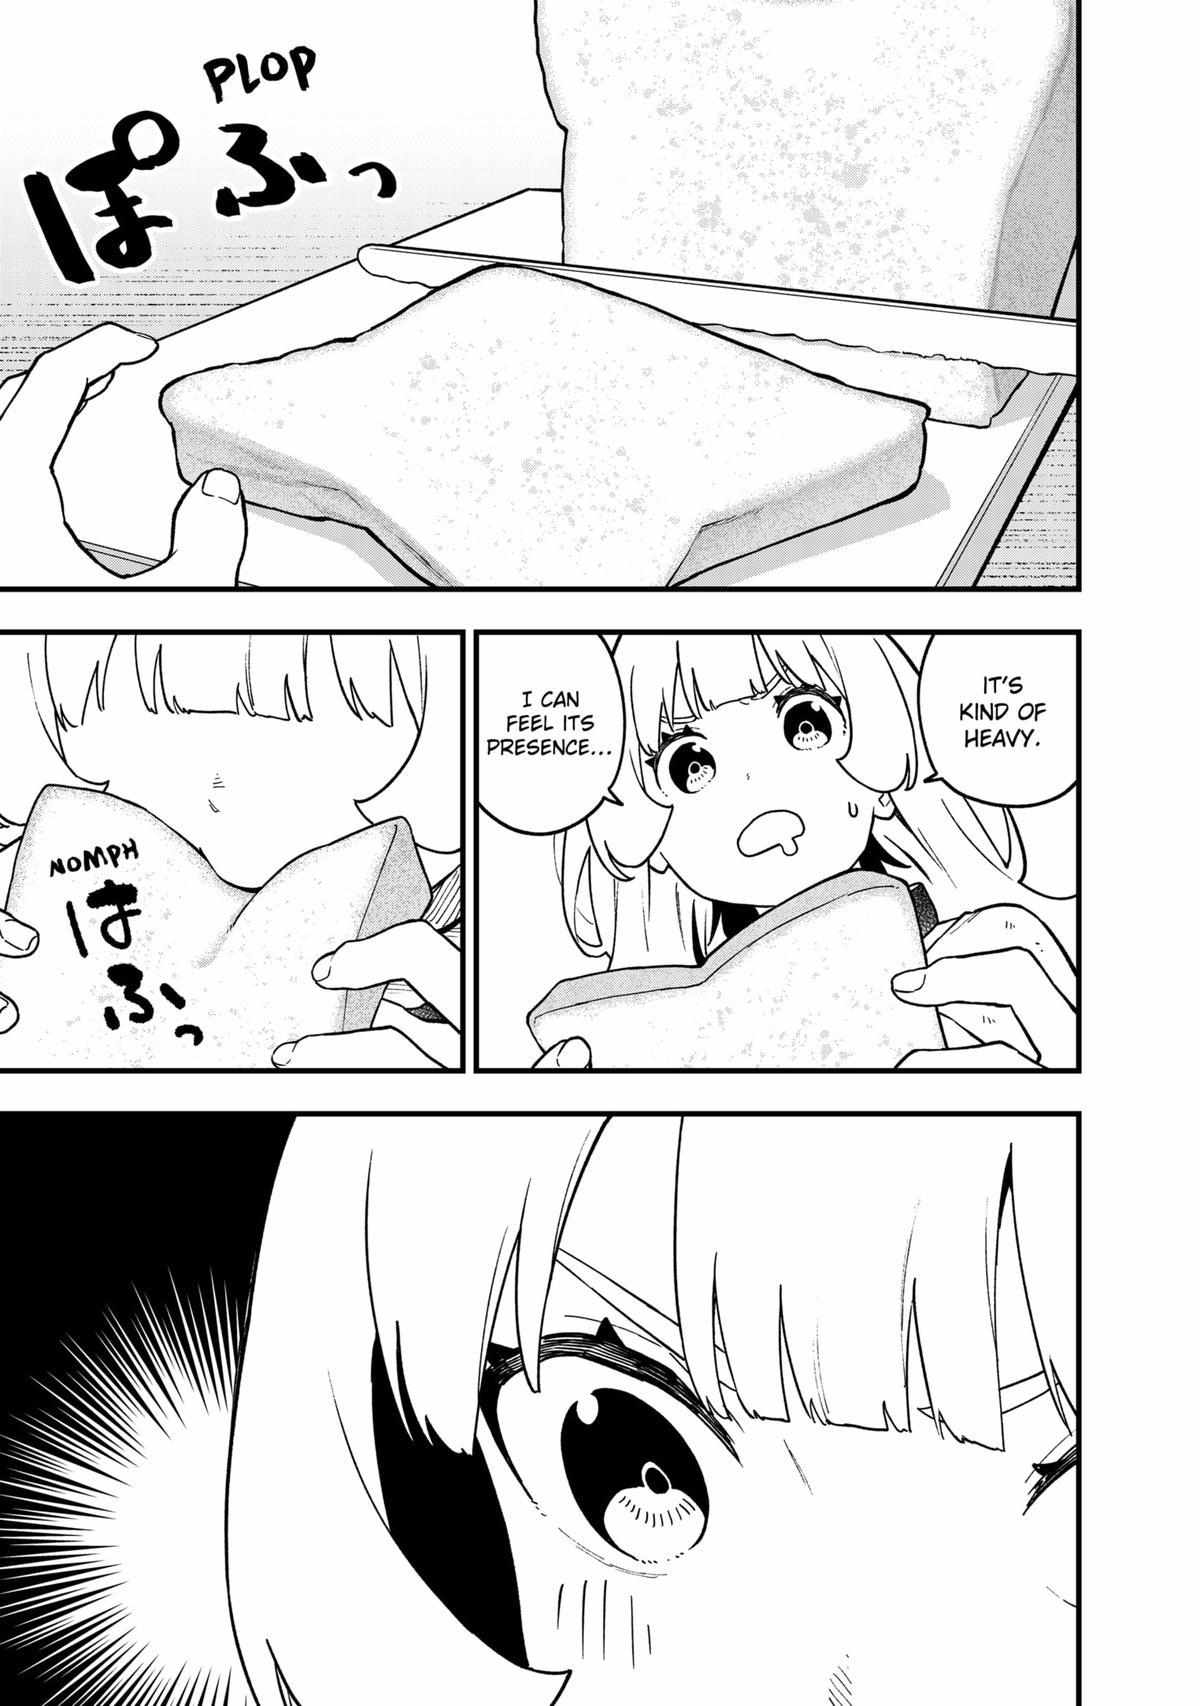 It's Time for "Interrogation", Princess! - chapter 200 - #6